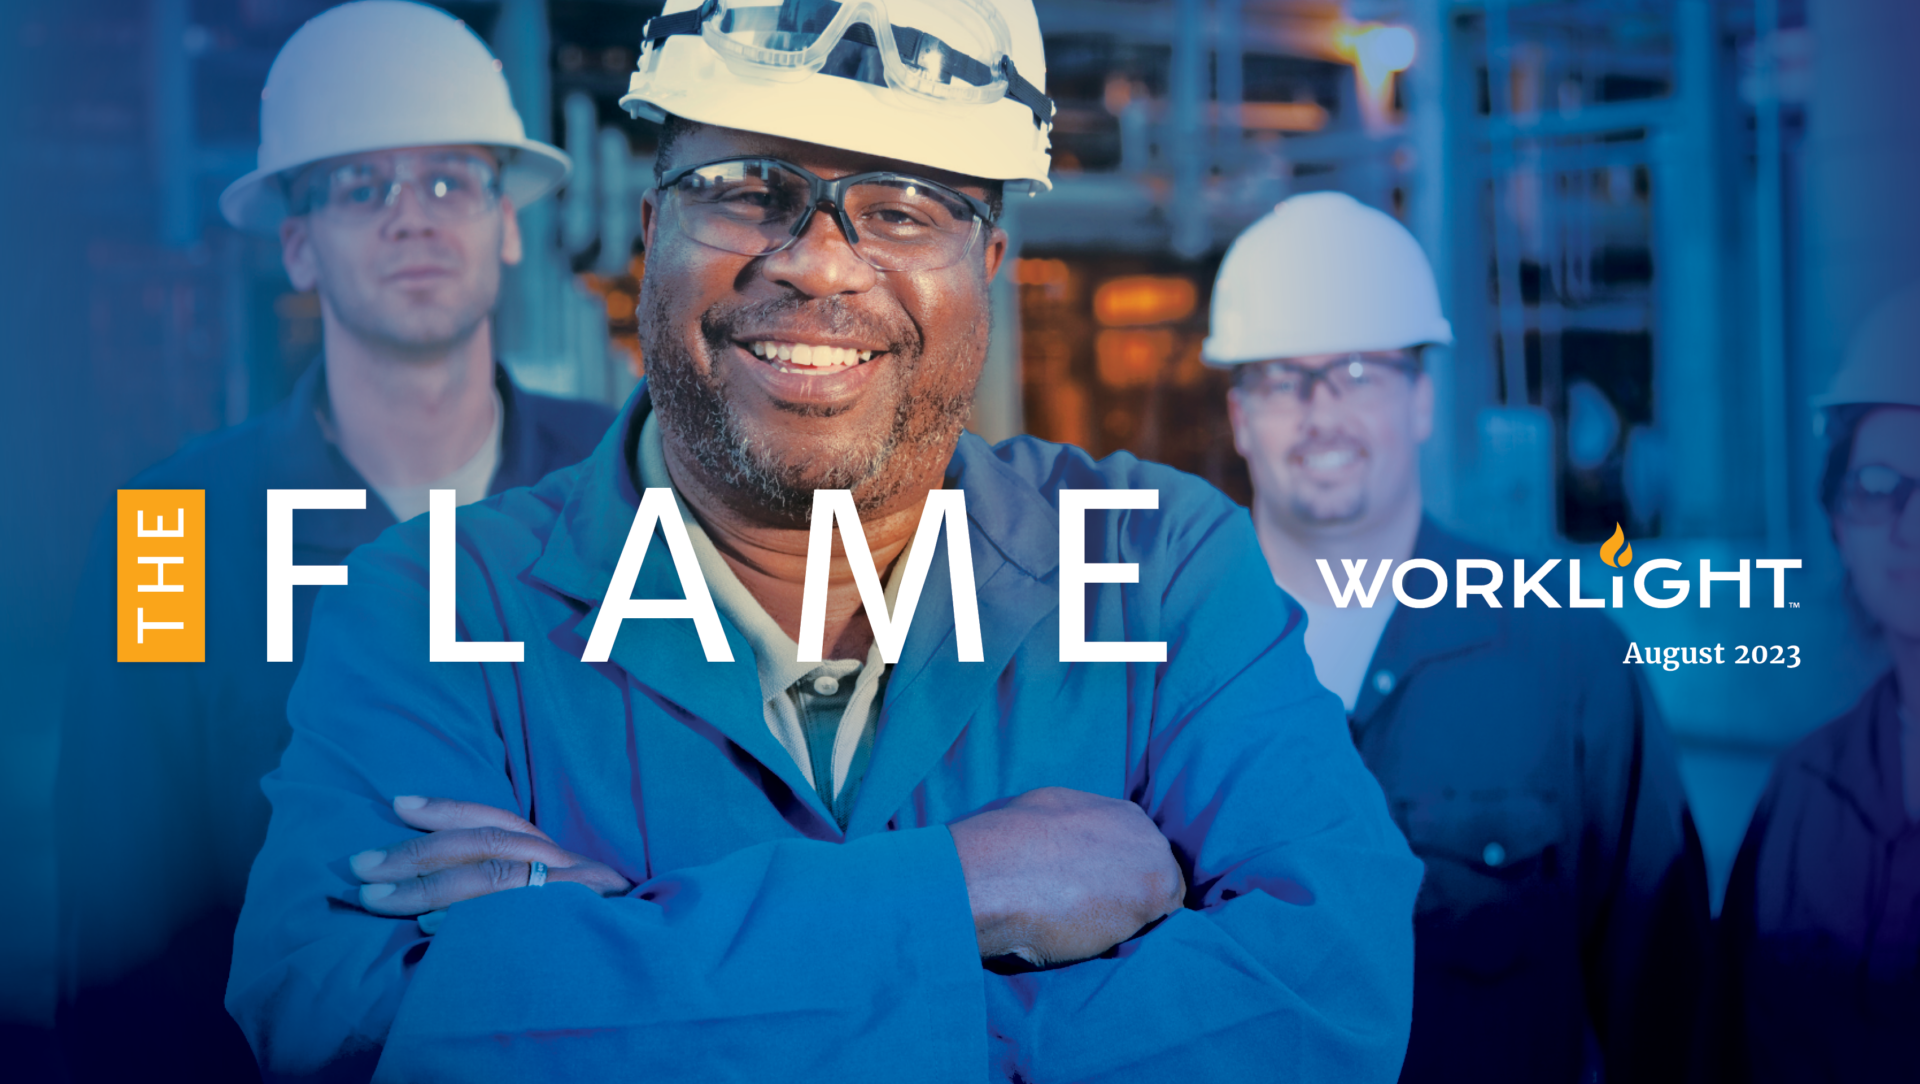 three men in their work uniforms smiling at the camera. Over the image are the words "The Flame" and the WorkLight logo.